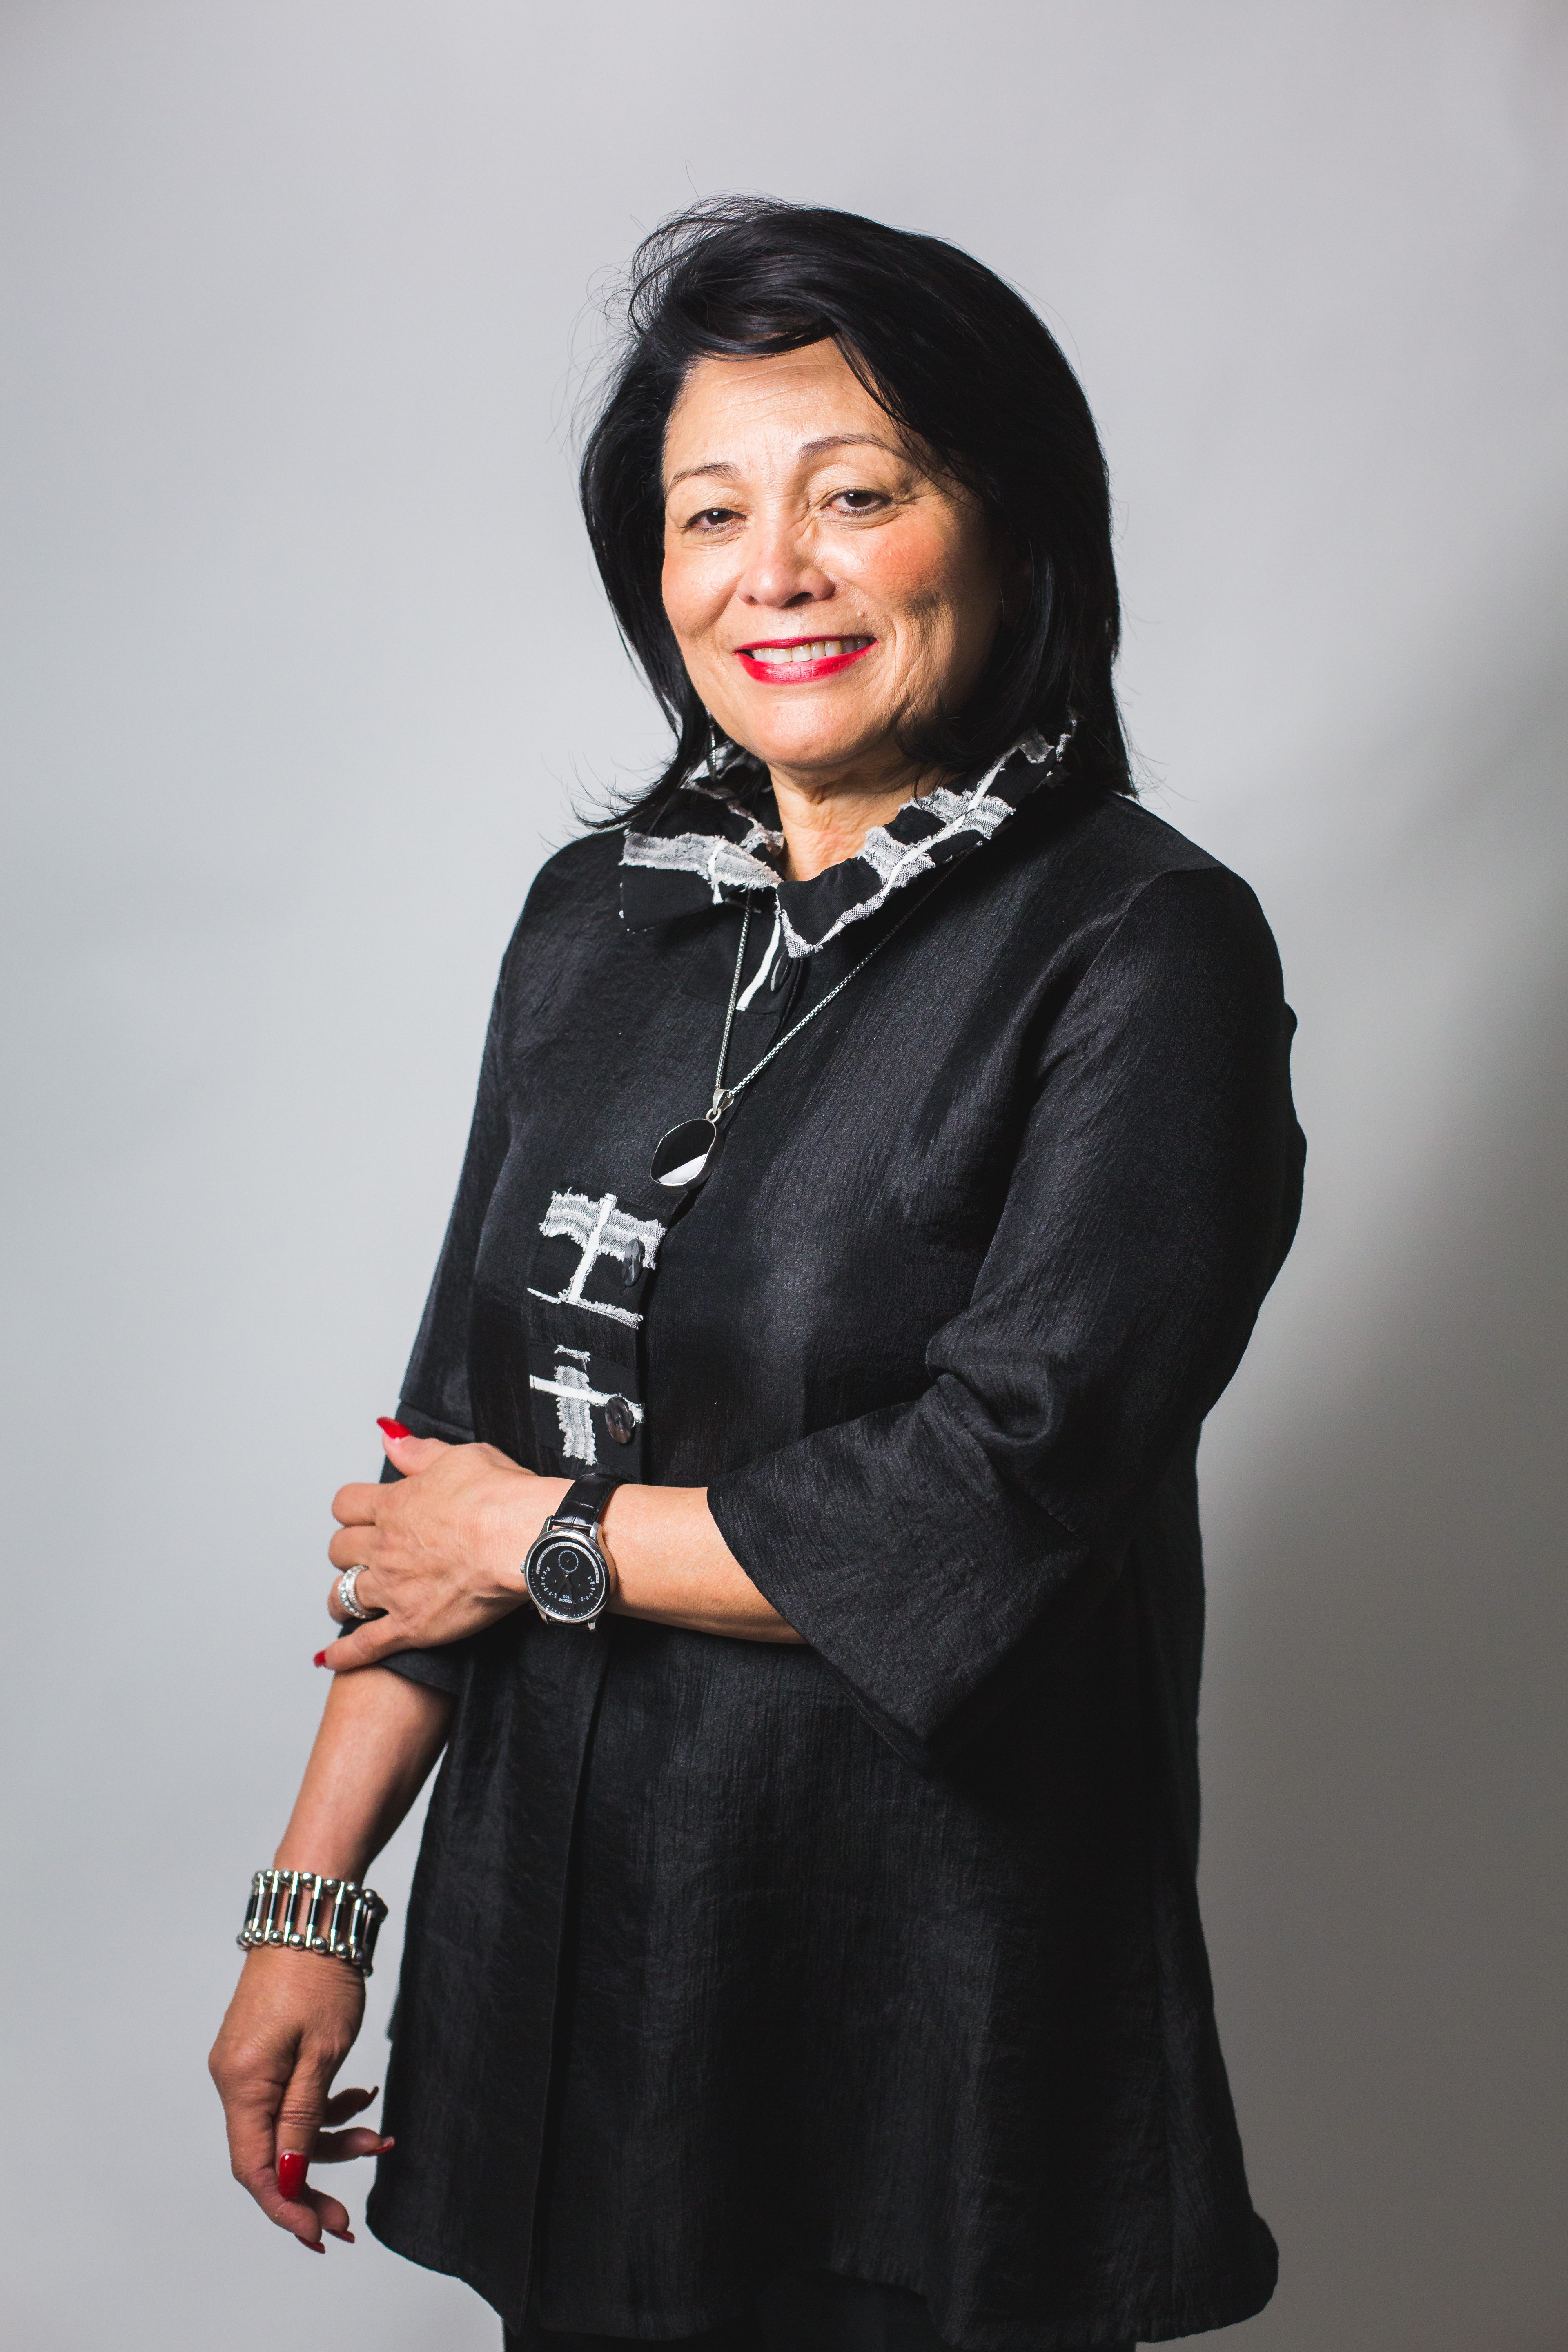 Dr. Gloria Bonilla-Santiago was awarded a $3 million grant from USAID to build a center in partnership with Paraguay's national university on ethics, equity, and transparency in the South American country. Photo: Sam Laub / AL DÍA News